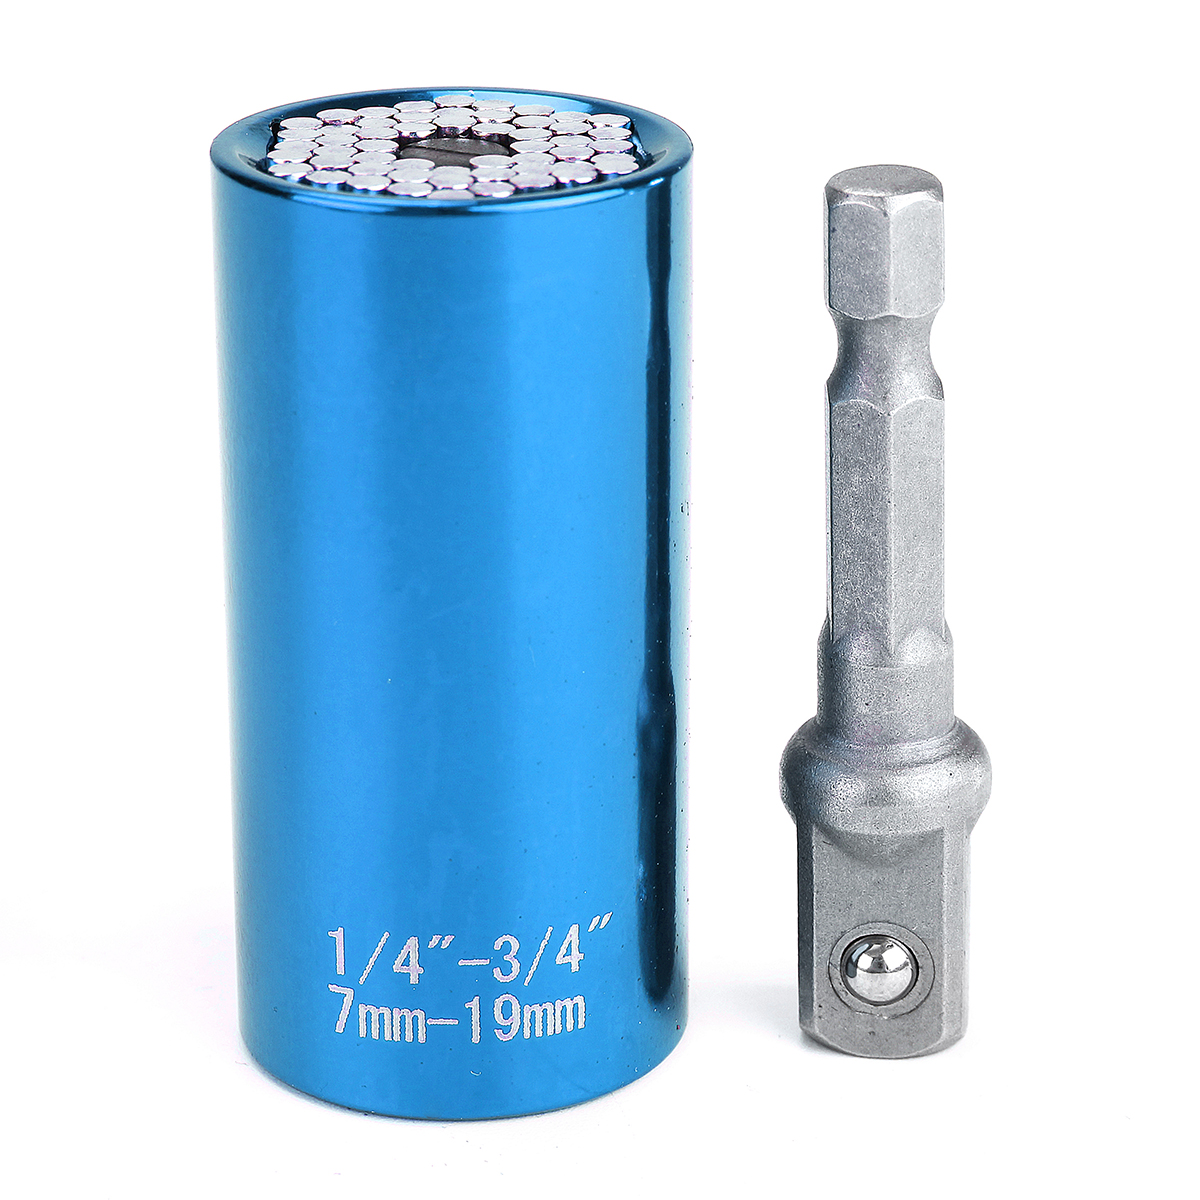 Find 7 19MM Universal Socket Adapter Wrench Sleeve with Power Drill Adapter Tool for Sale on Gipsybee.com with cryptocurrencies